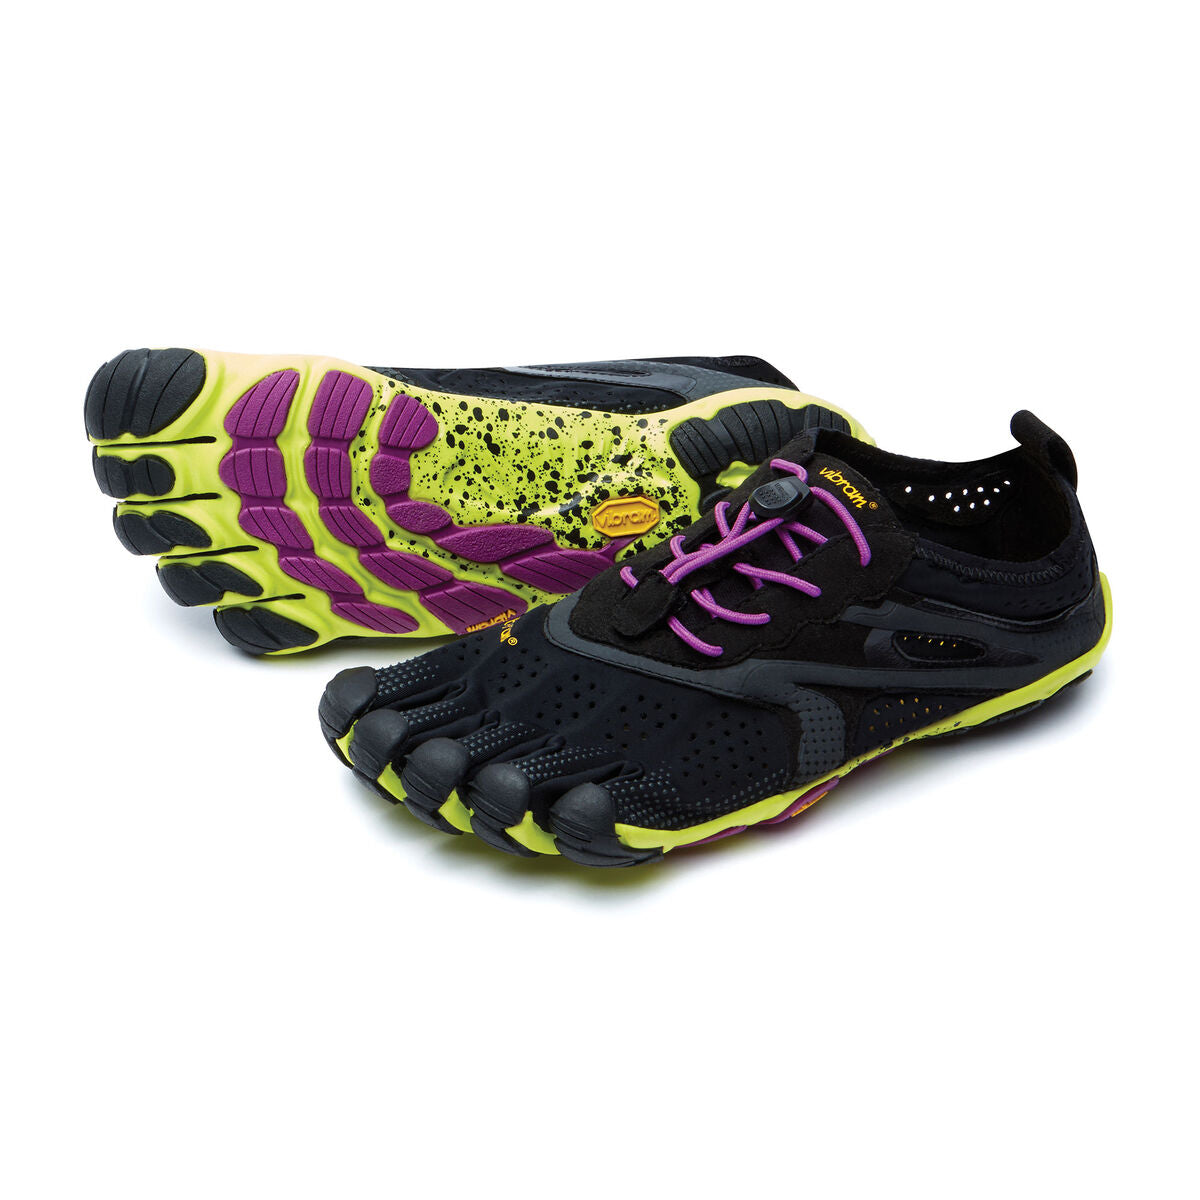 Women's Vibram Five Fingers V-Run Running Shoe in Black/Yellow/Purple from the front